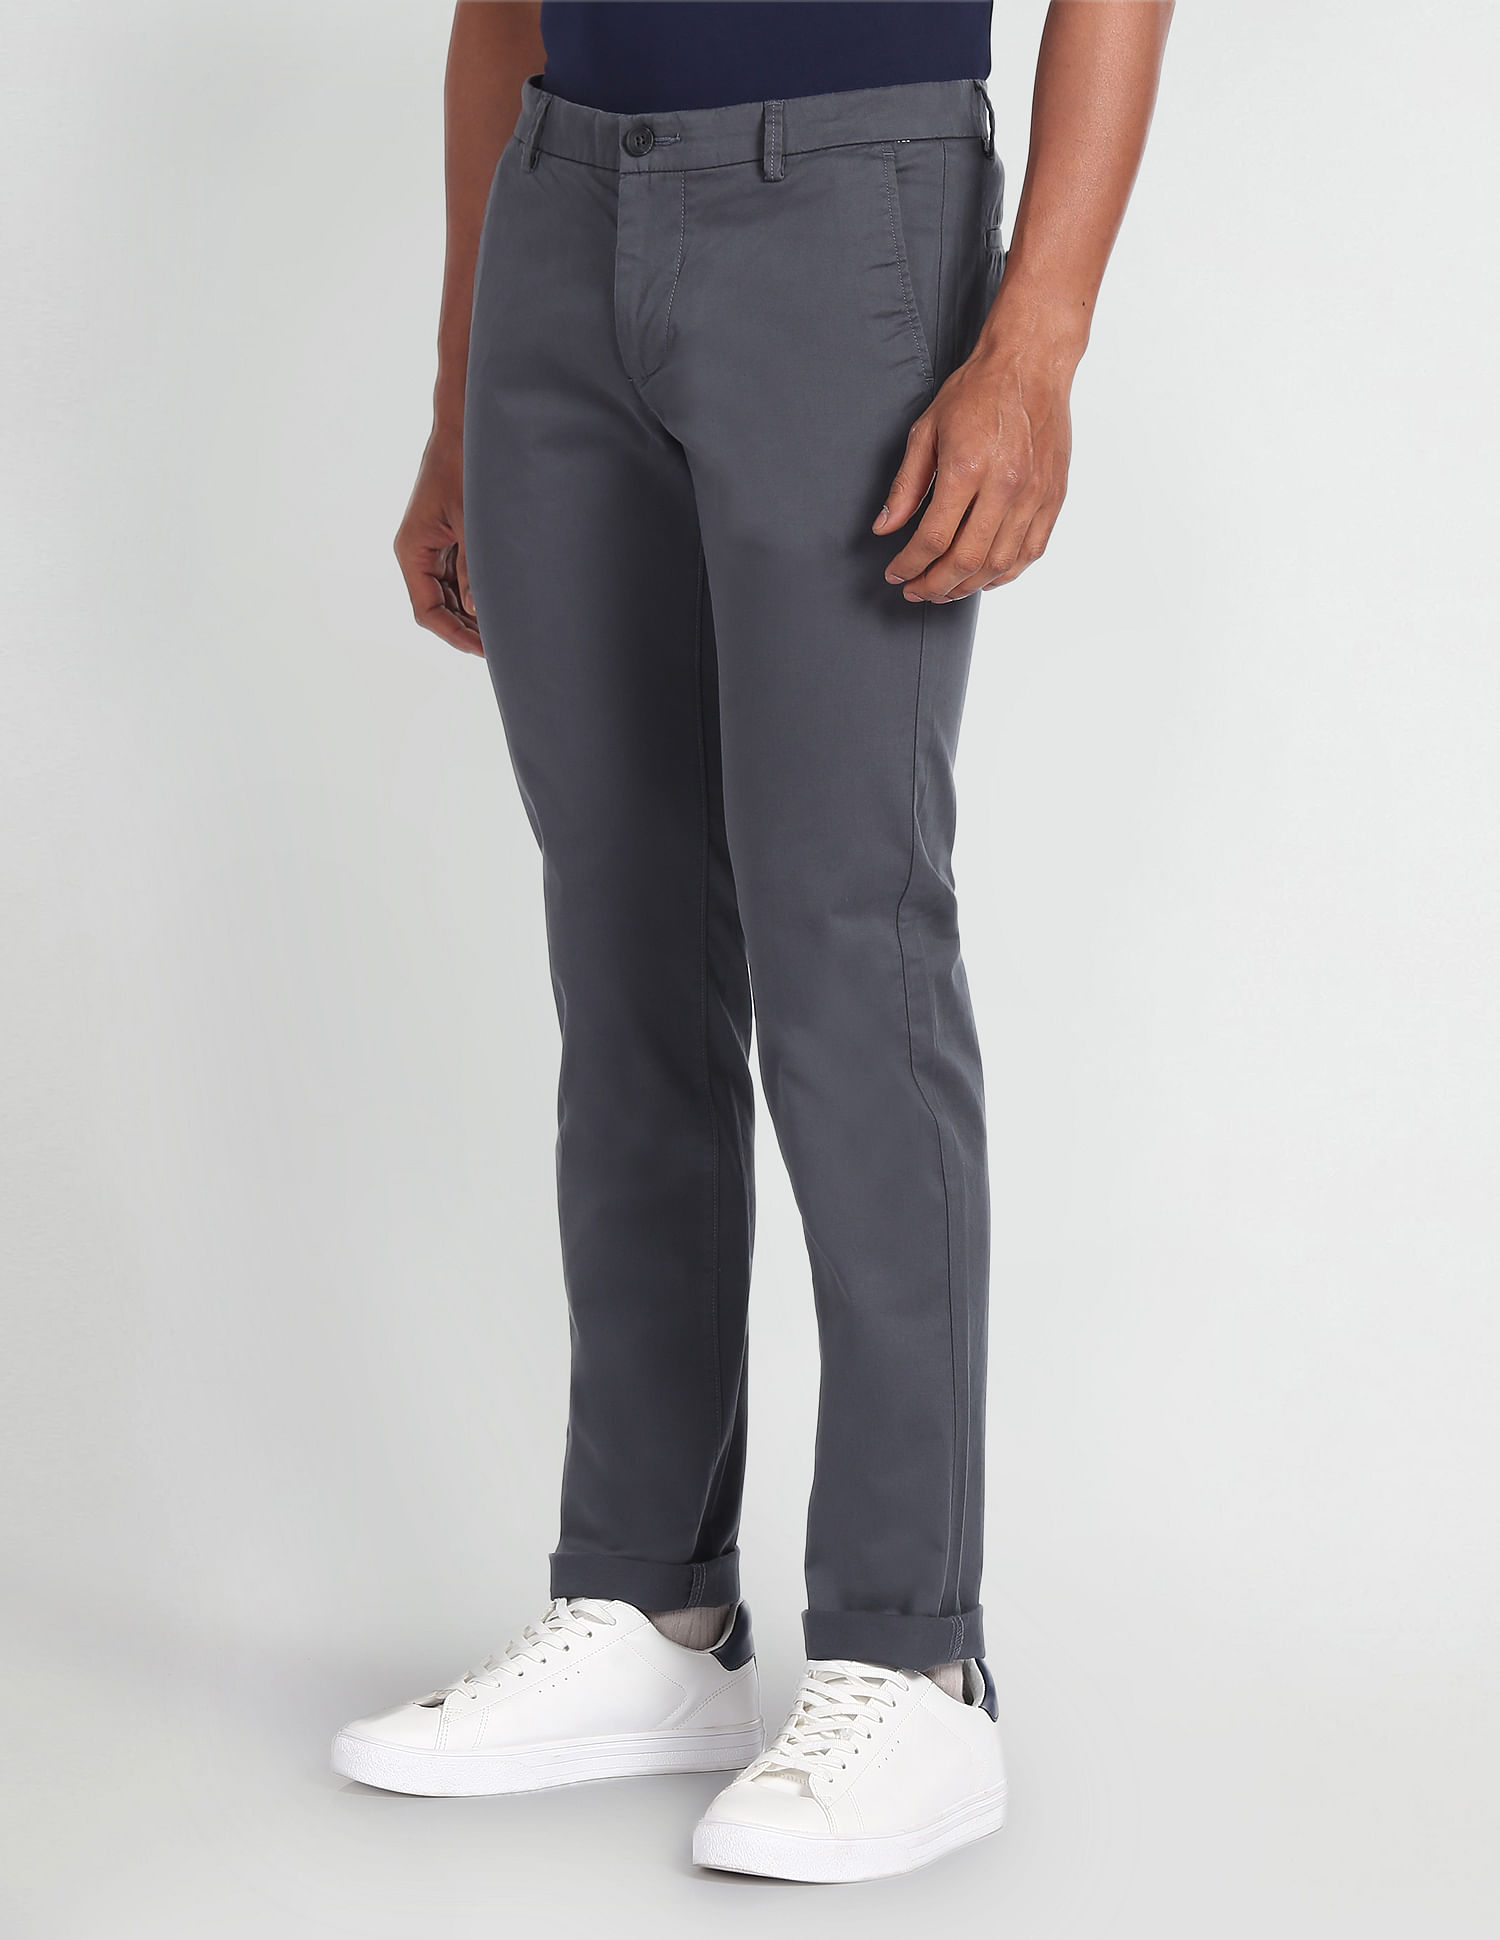 U.S. Polo Assn. Light Grey Slim Fit Flat Front Trousers-atpcosmetics.com.vn